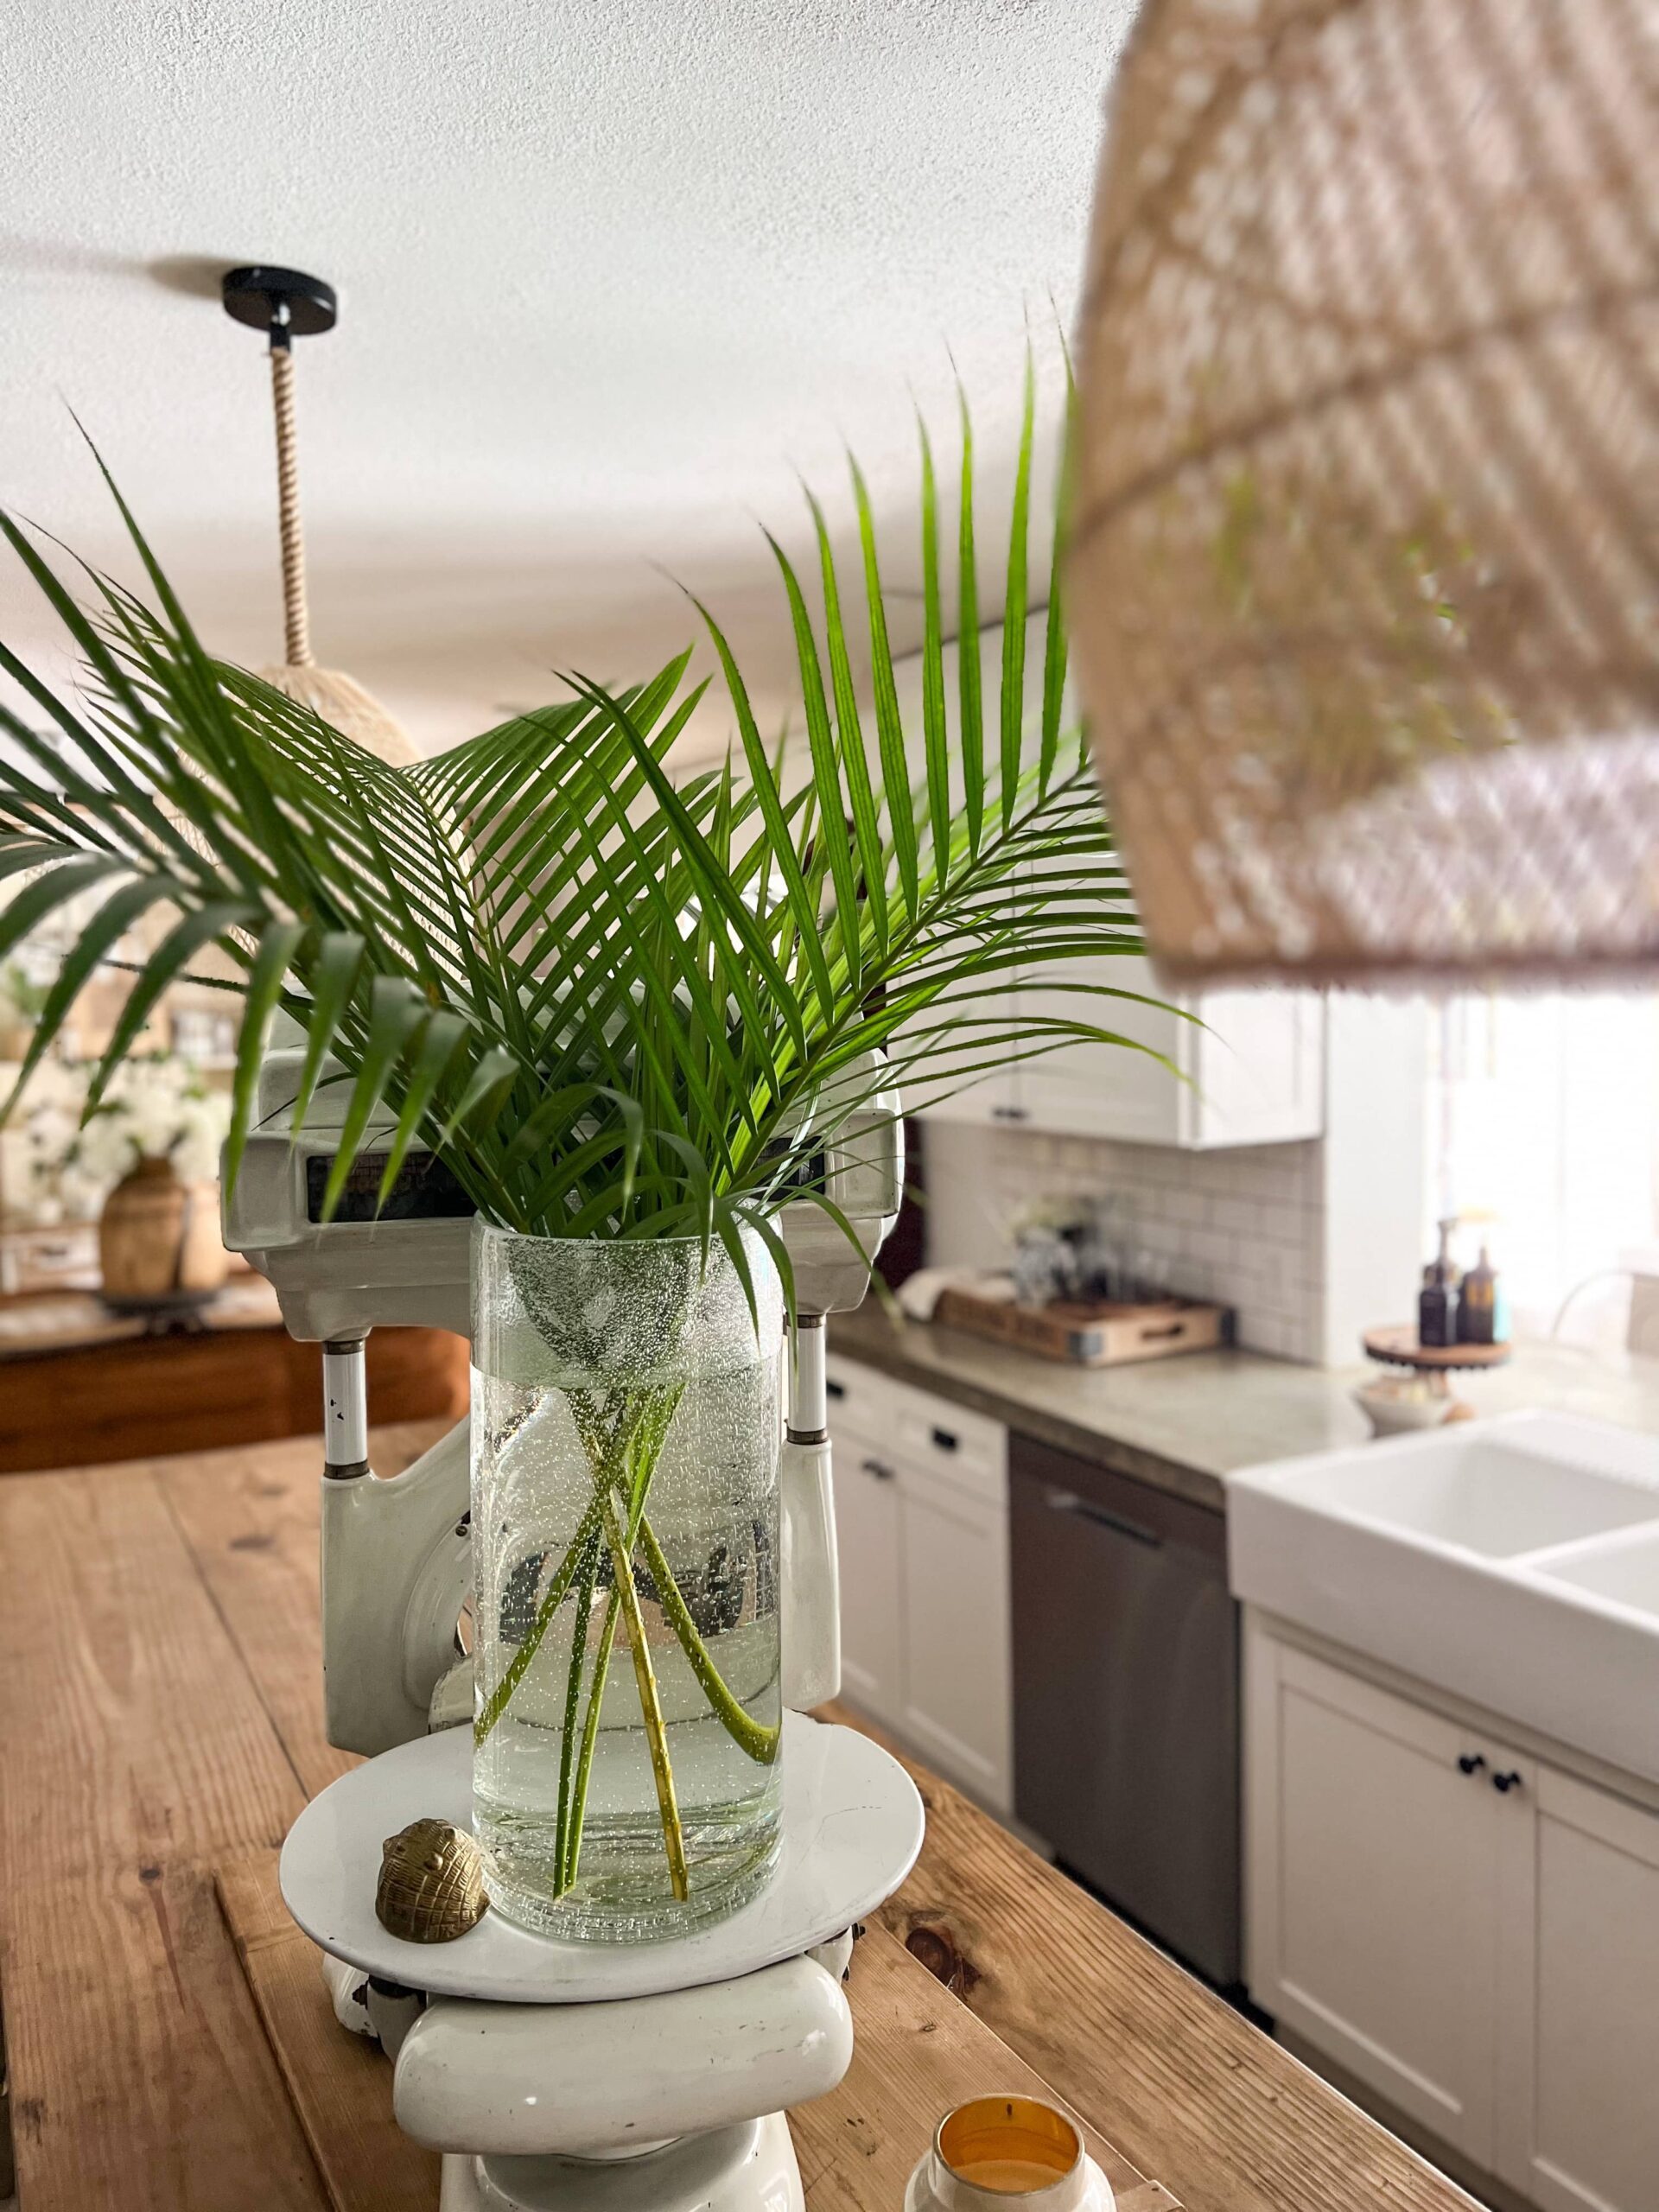 glass vase of palm fronds on top of a white vintage scale in the center of a kitchen island